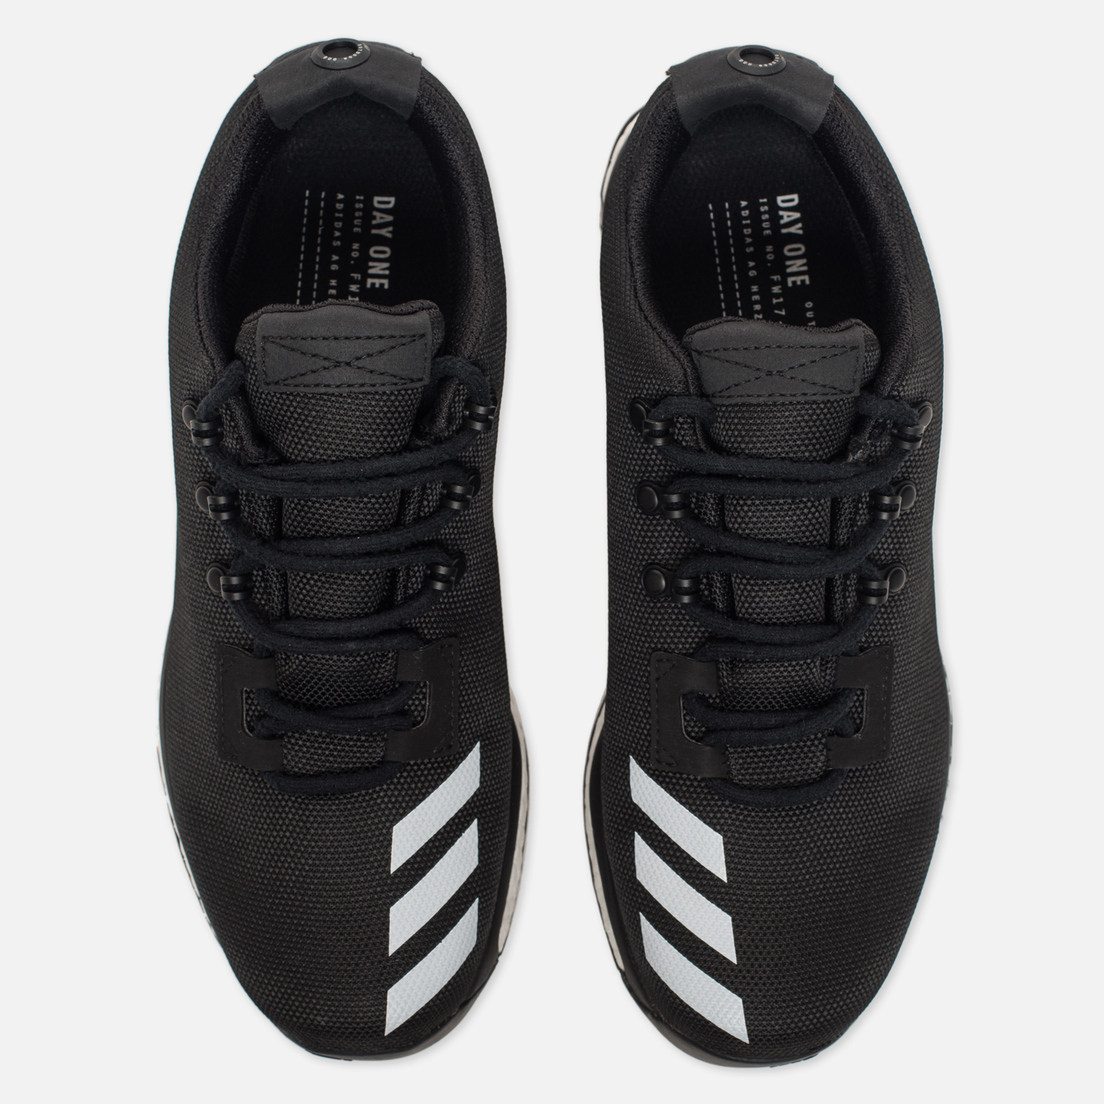 adidas day one terrex agravic shoes